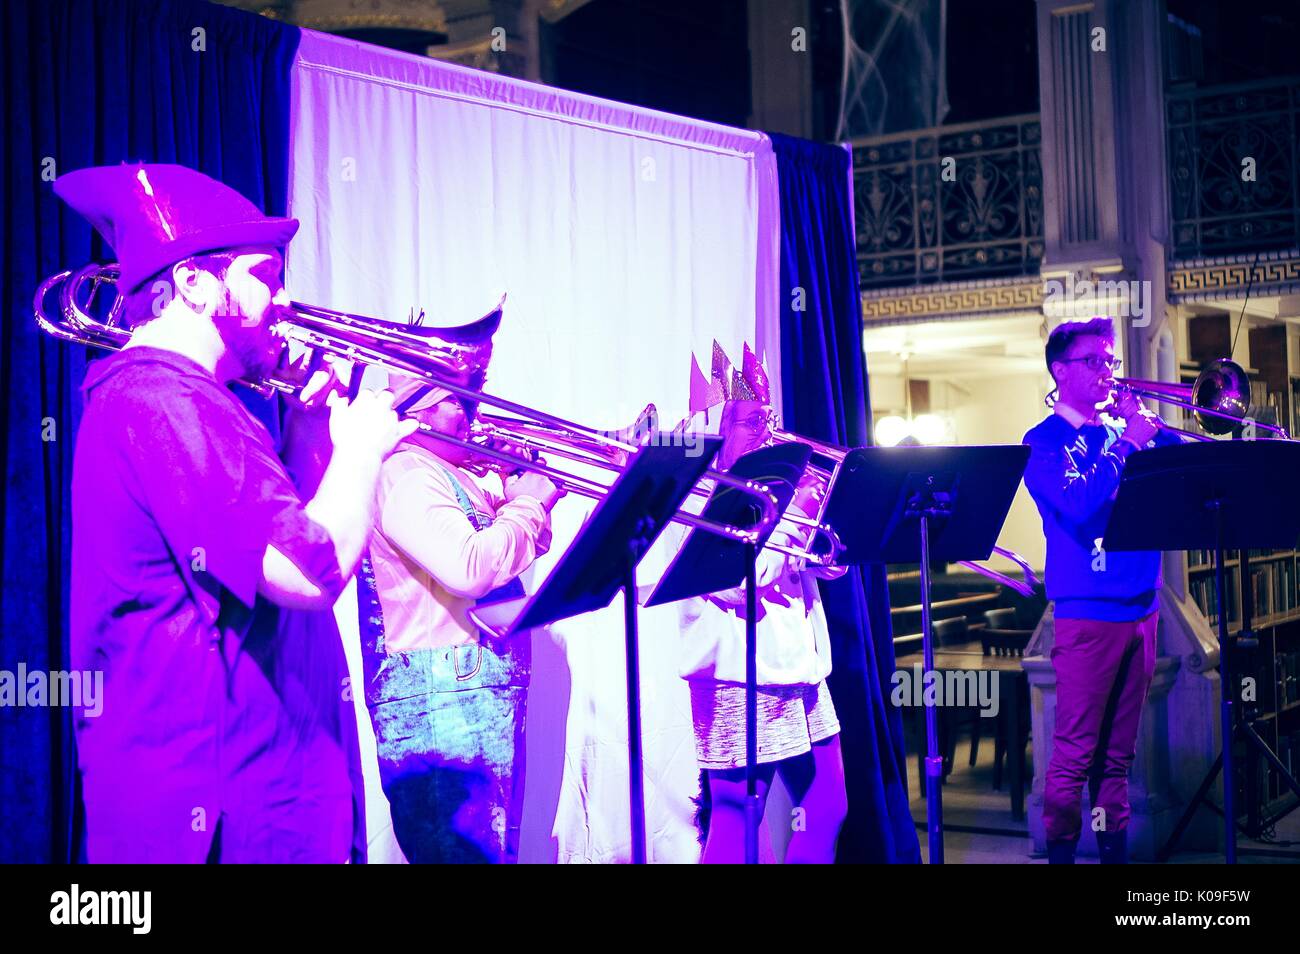 Four students dressed in costumes playing trombones onstage in purple lighting, Halloween at Peabody, October 31, 2015. Courtesy Eric Chen. Stock Photo